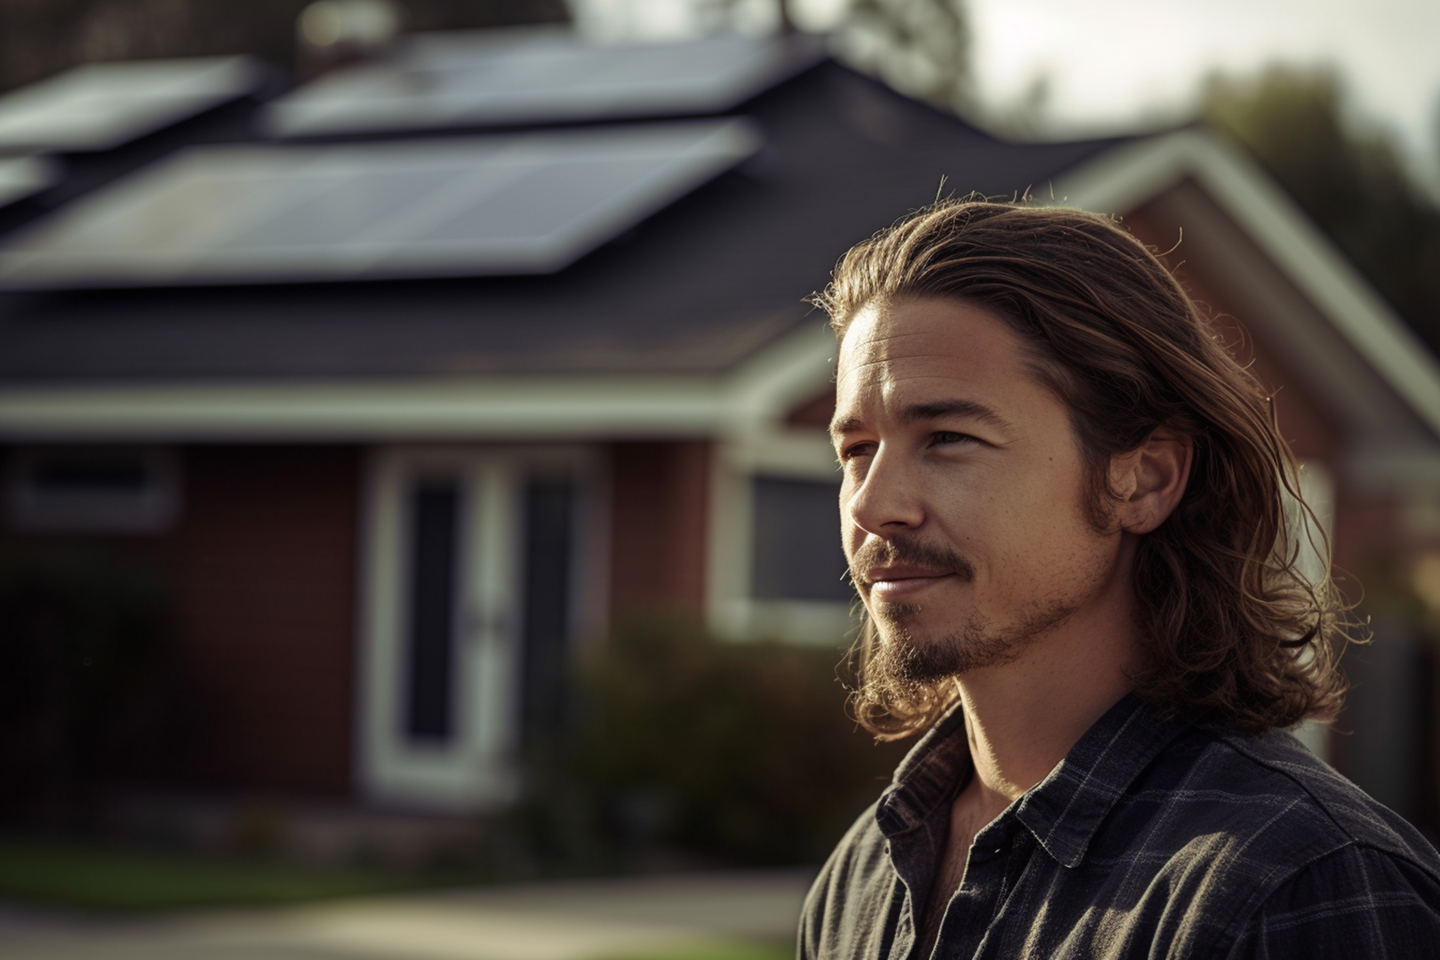 Solar homeowner stands in front of house with solar panels in background